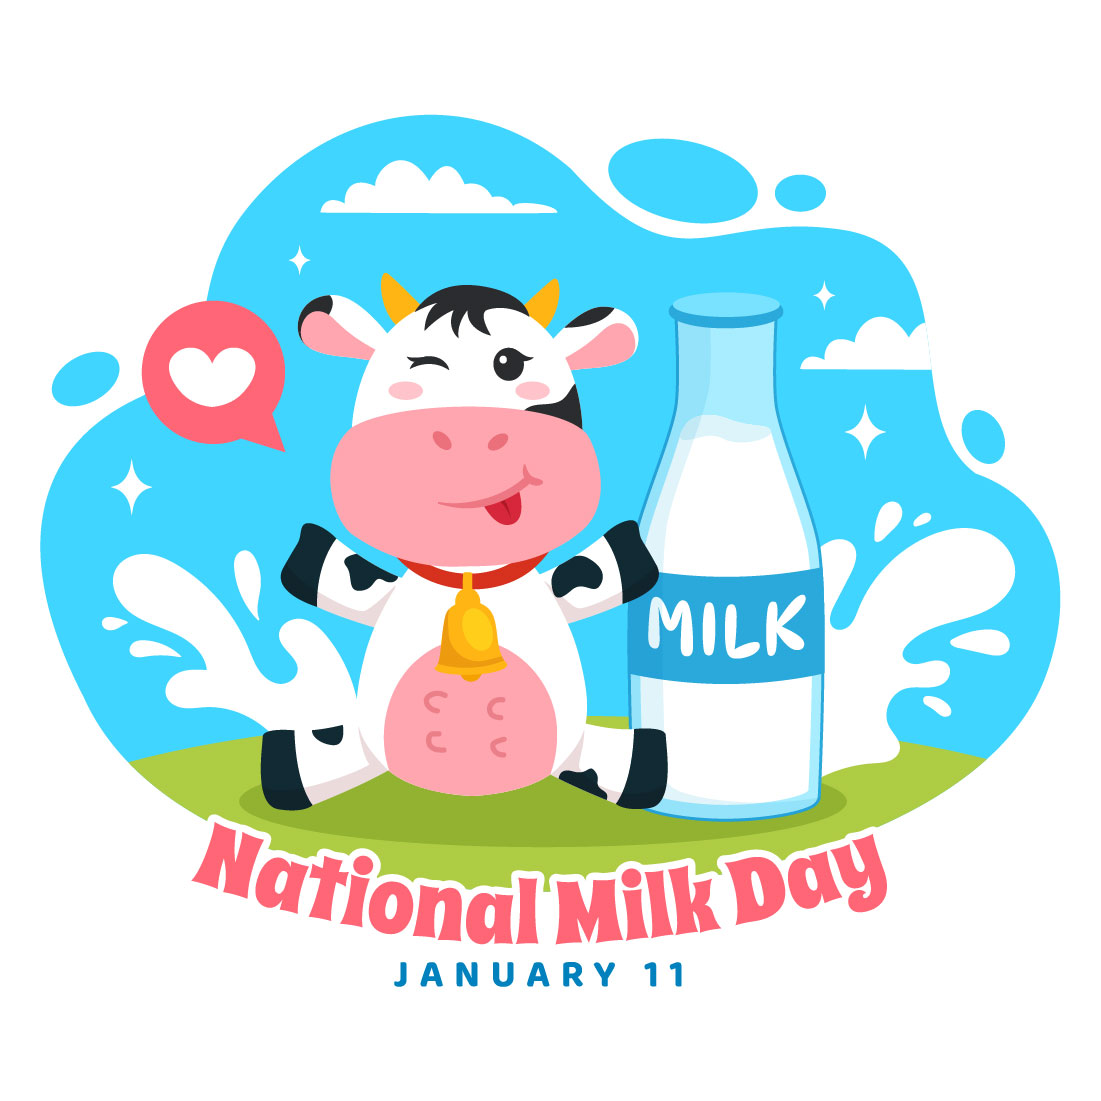 12 National Milk Day Illustration preview image.